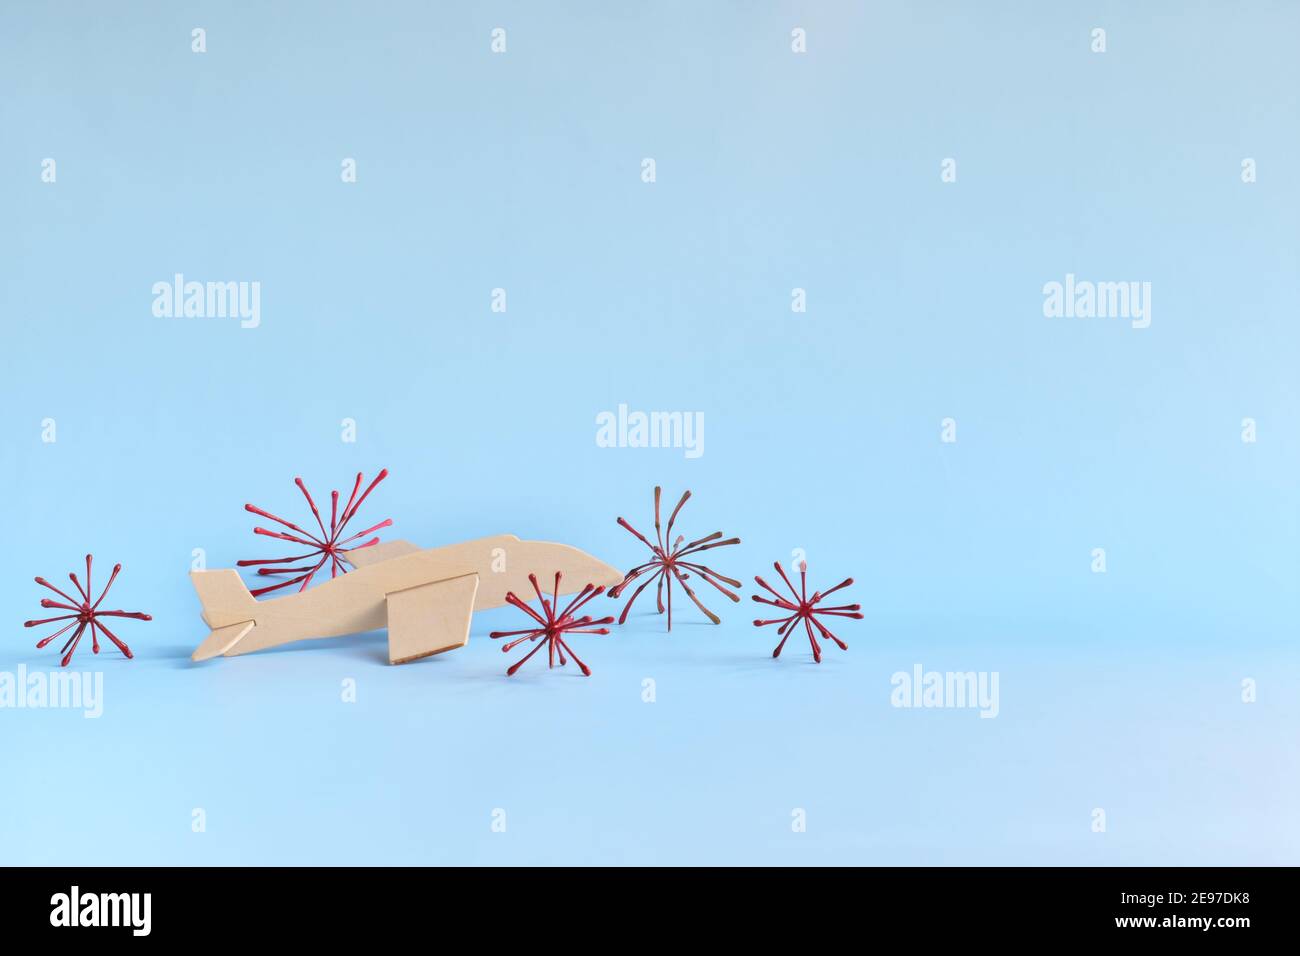 Parked wooden airplane model on sky blue background with coronavirus. Travel ban and cancelled vacation due to covid-19 pandemic concept. Stock Photo